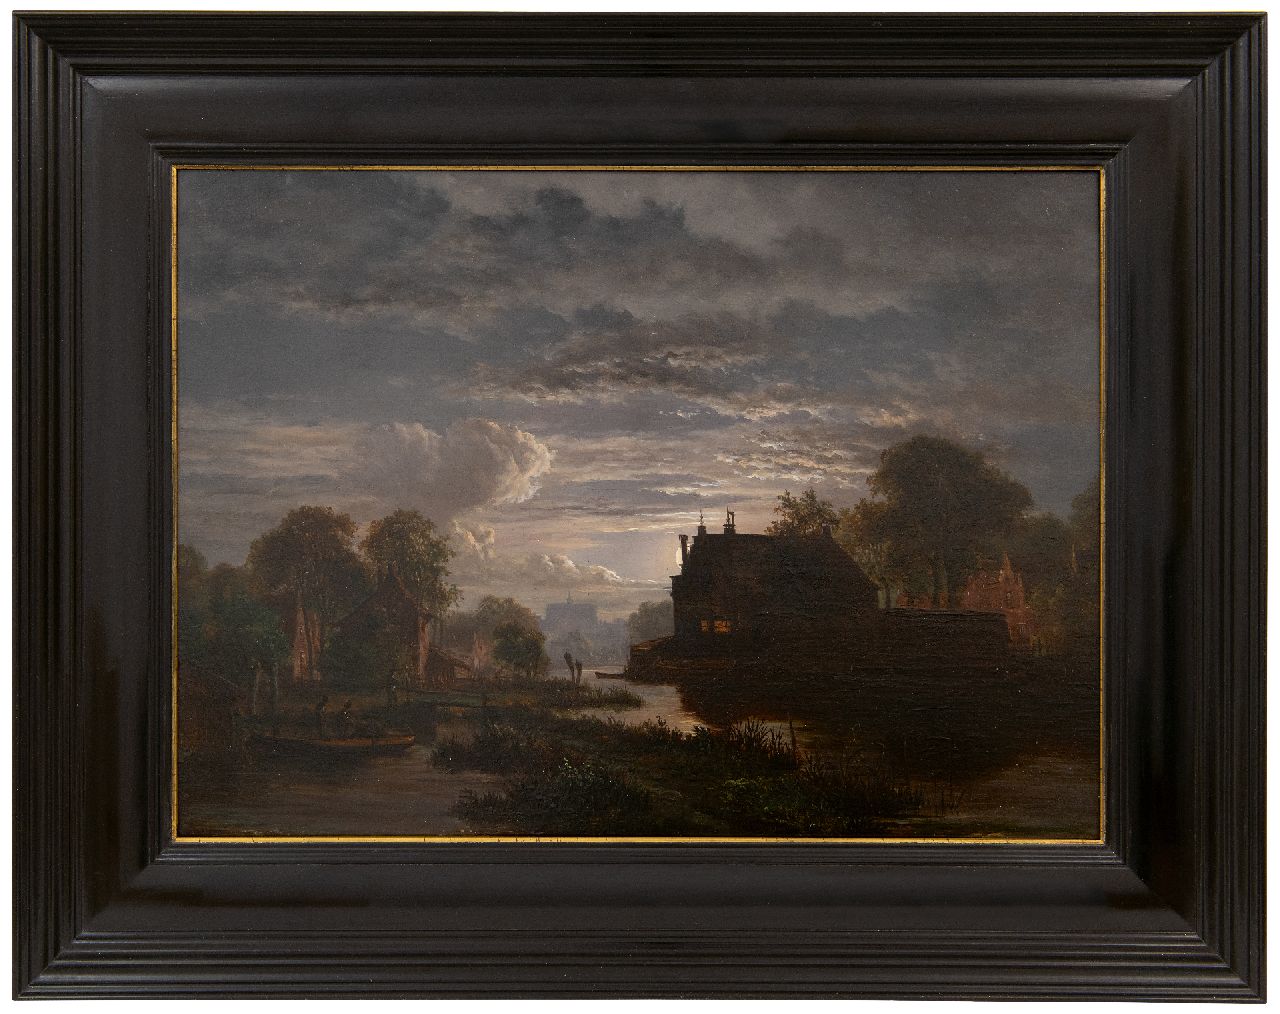 Abels J.Th.  | 'Jacobus' Theodorus Abels | Paintings offered for sale | Moonlit river landscape near a city, oil on panel 28.8 x 39.1 cm